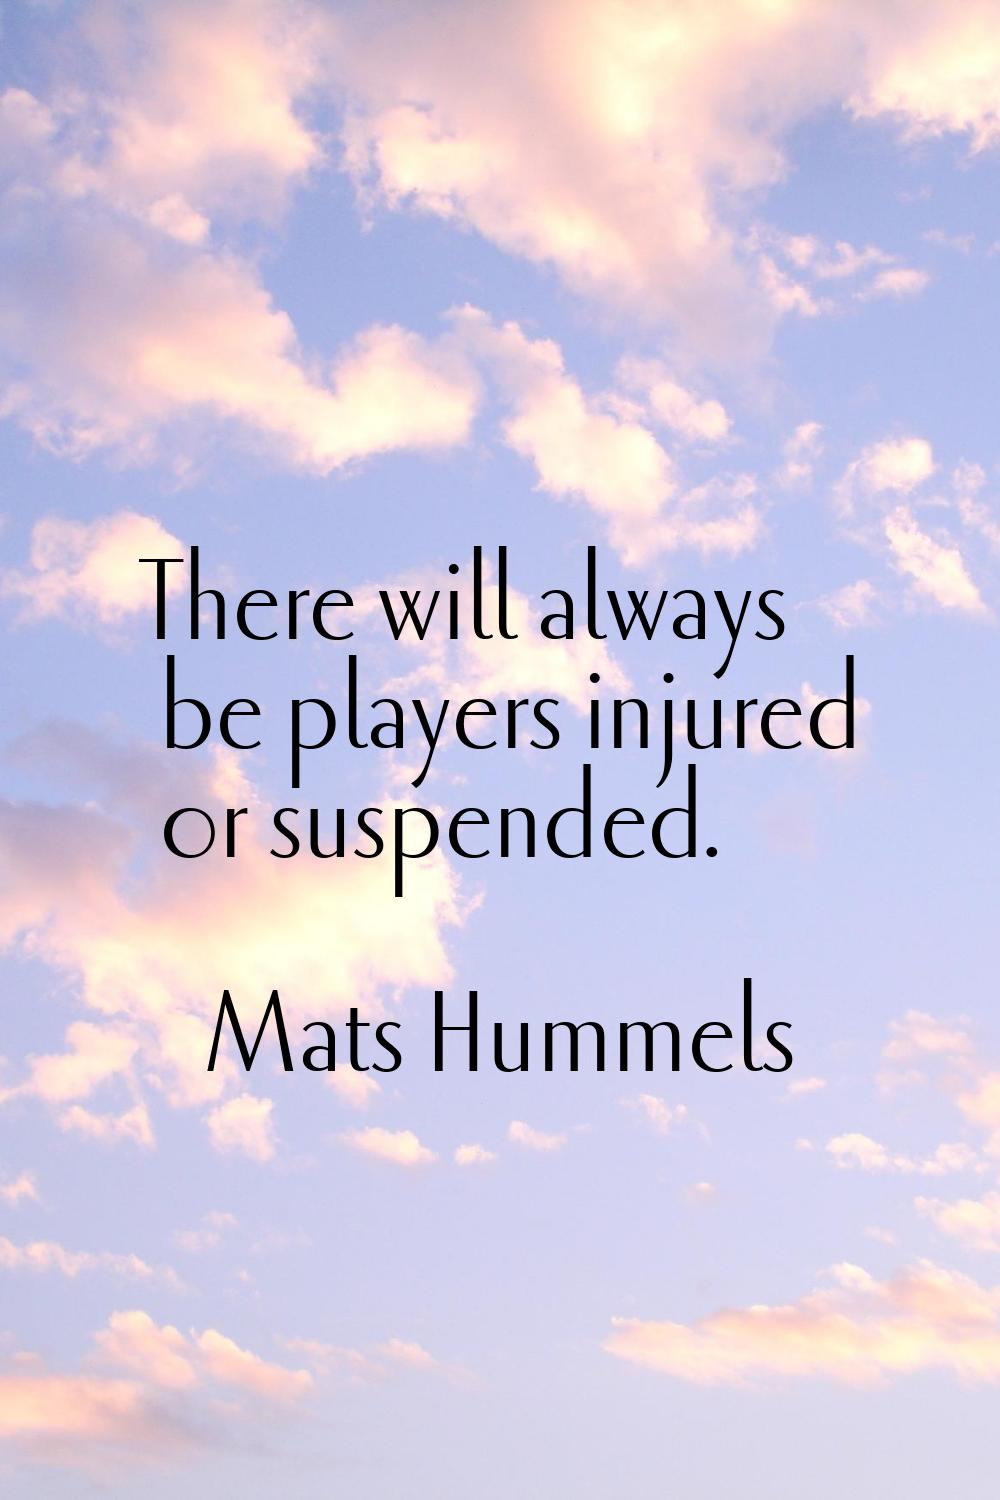 There will always be players injured or suspended.